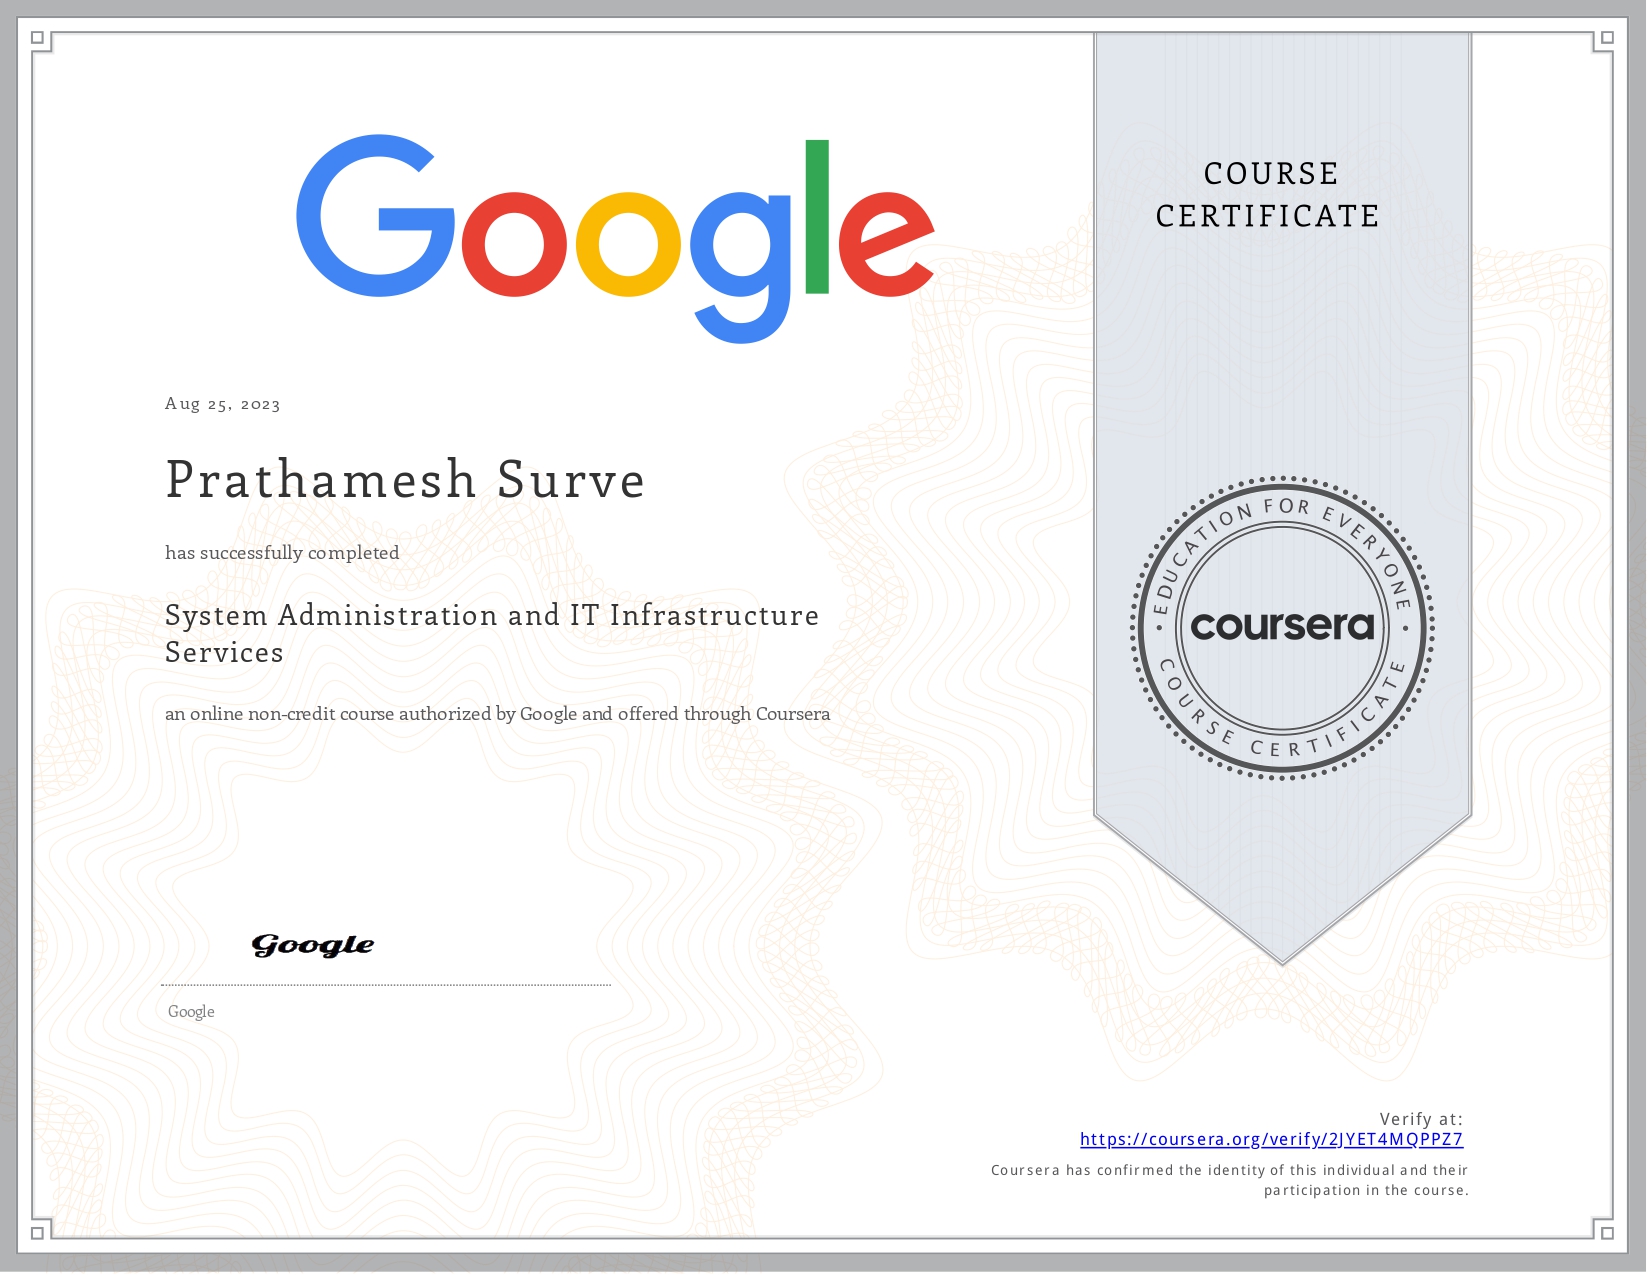 System Administration & IT Infrastructure Services by Google Certificate by Coursera